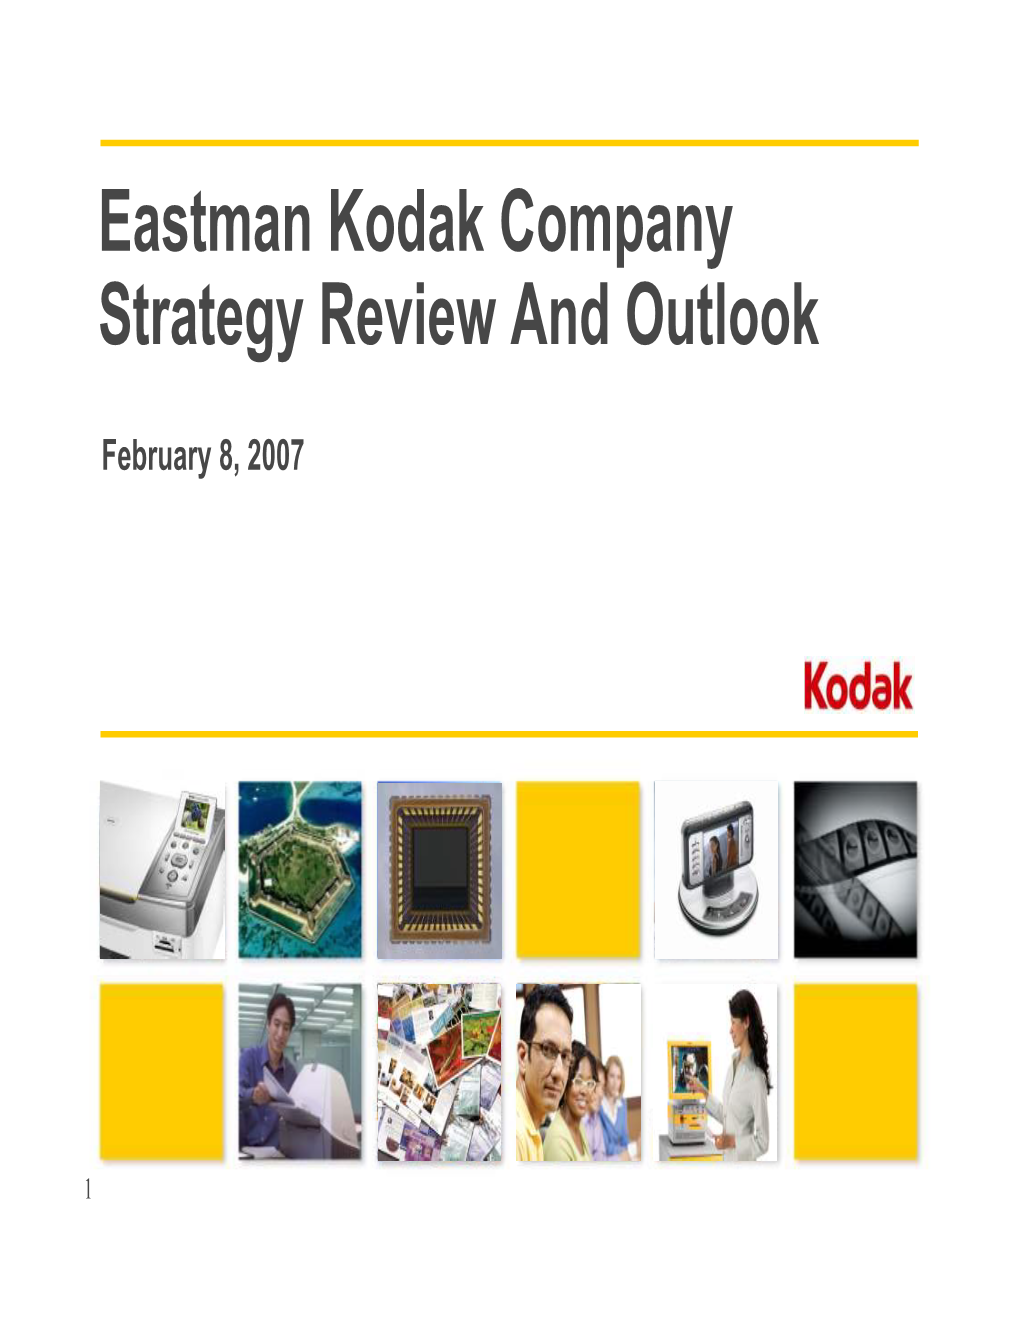 Eastman Kodak Company Strategy Review and Outlook